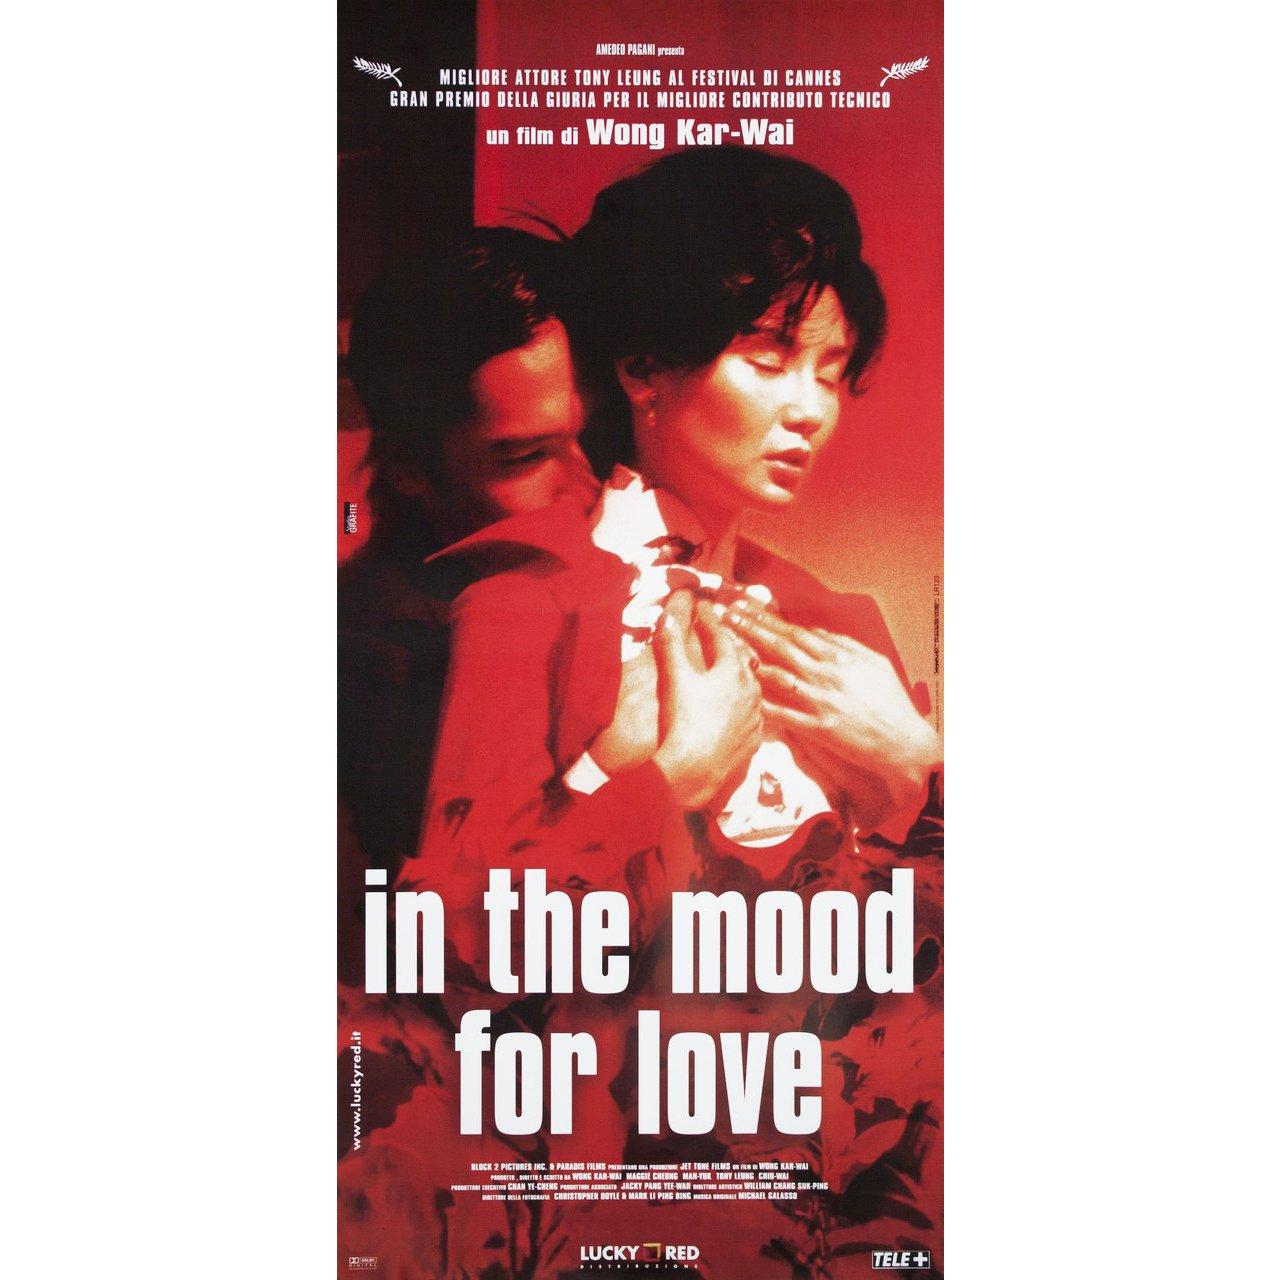 Original 2000 Italian locandina poster for the film ‘In the Mood for Love’ directed by Kar Wai Wong with Maggie Cheung / Tony Chiu Wai Leung / Ping Lam Siu / Tung Cho 'Joe' Cheung. Very good-fine condition, rolled. Please note: the size is stated in